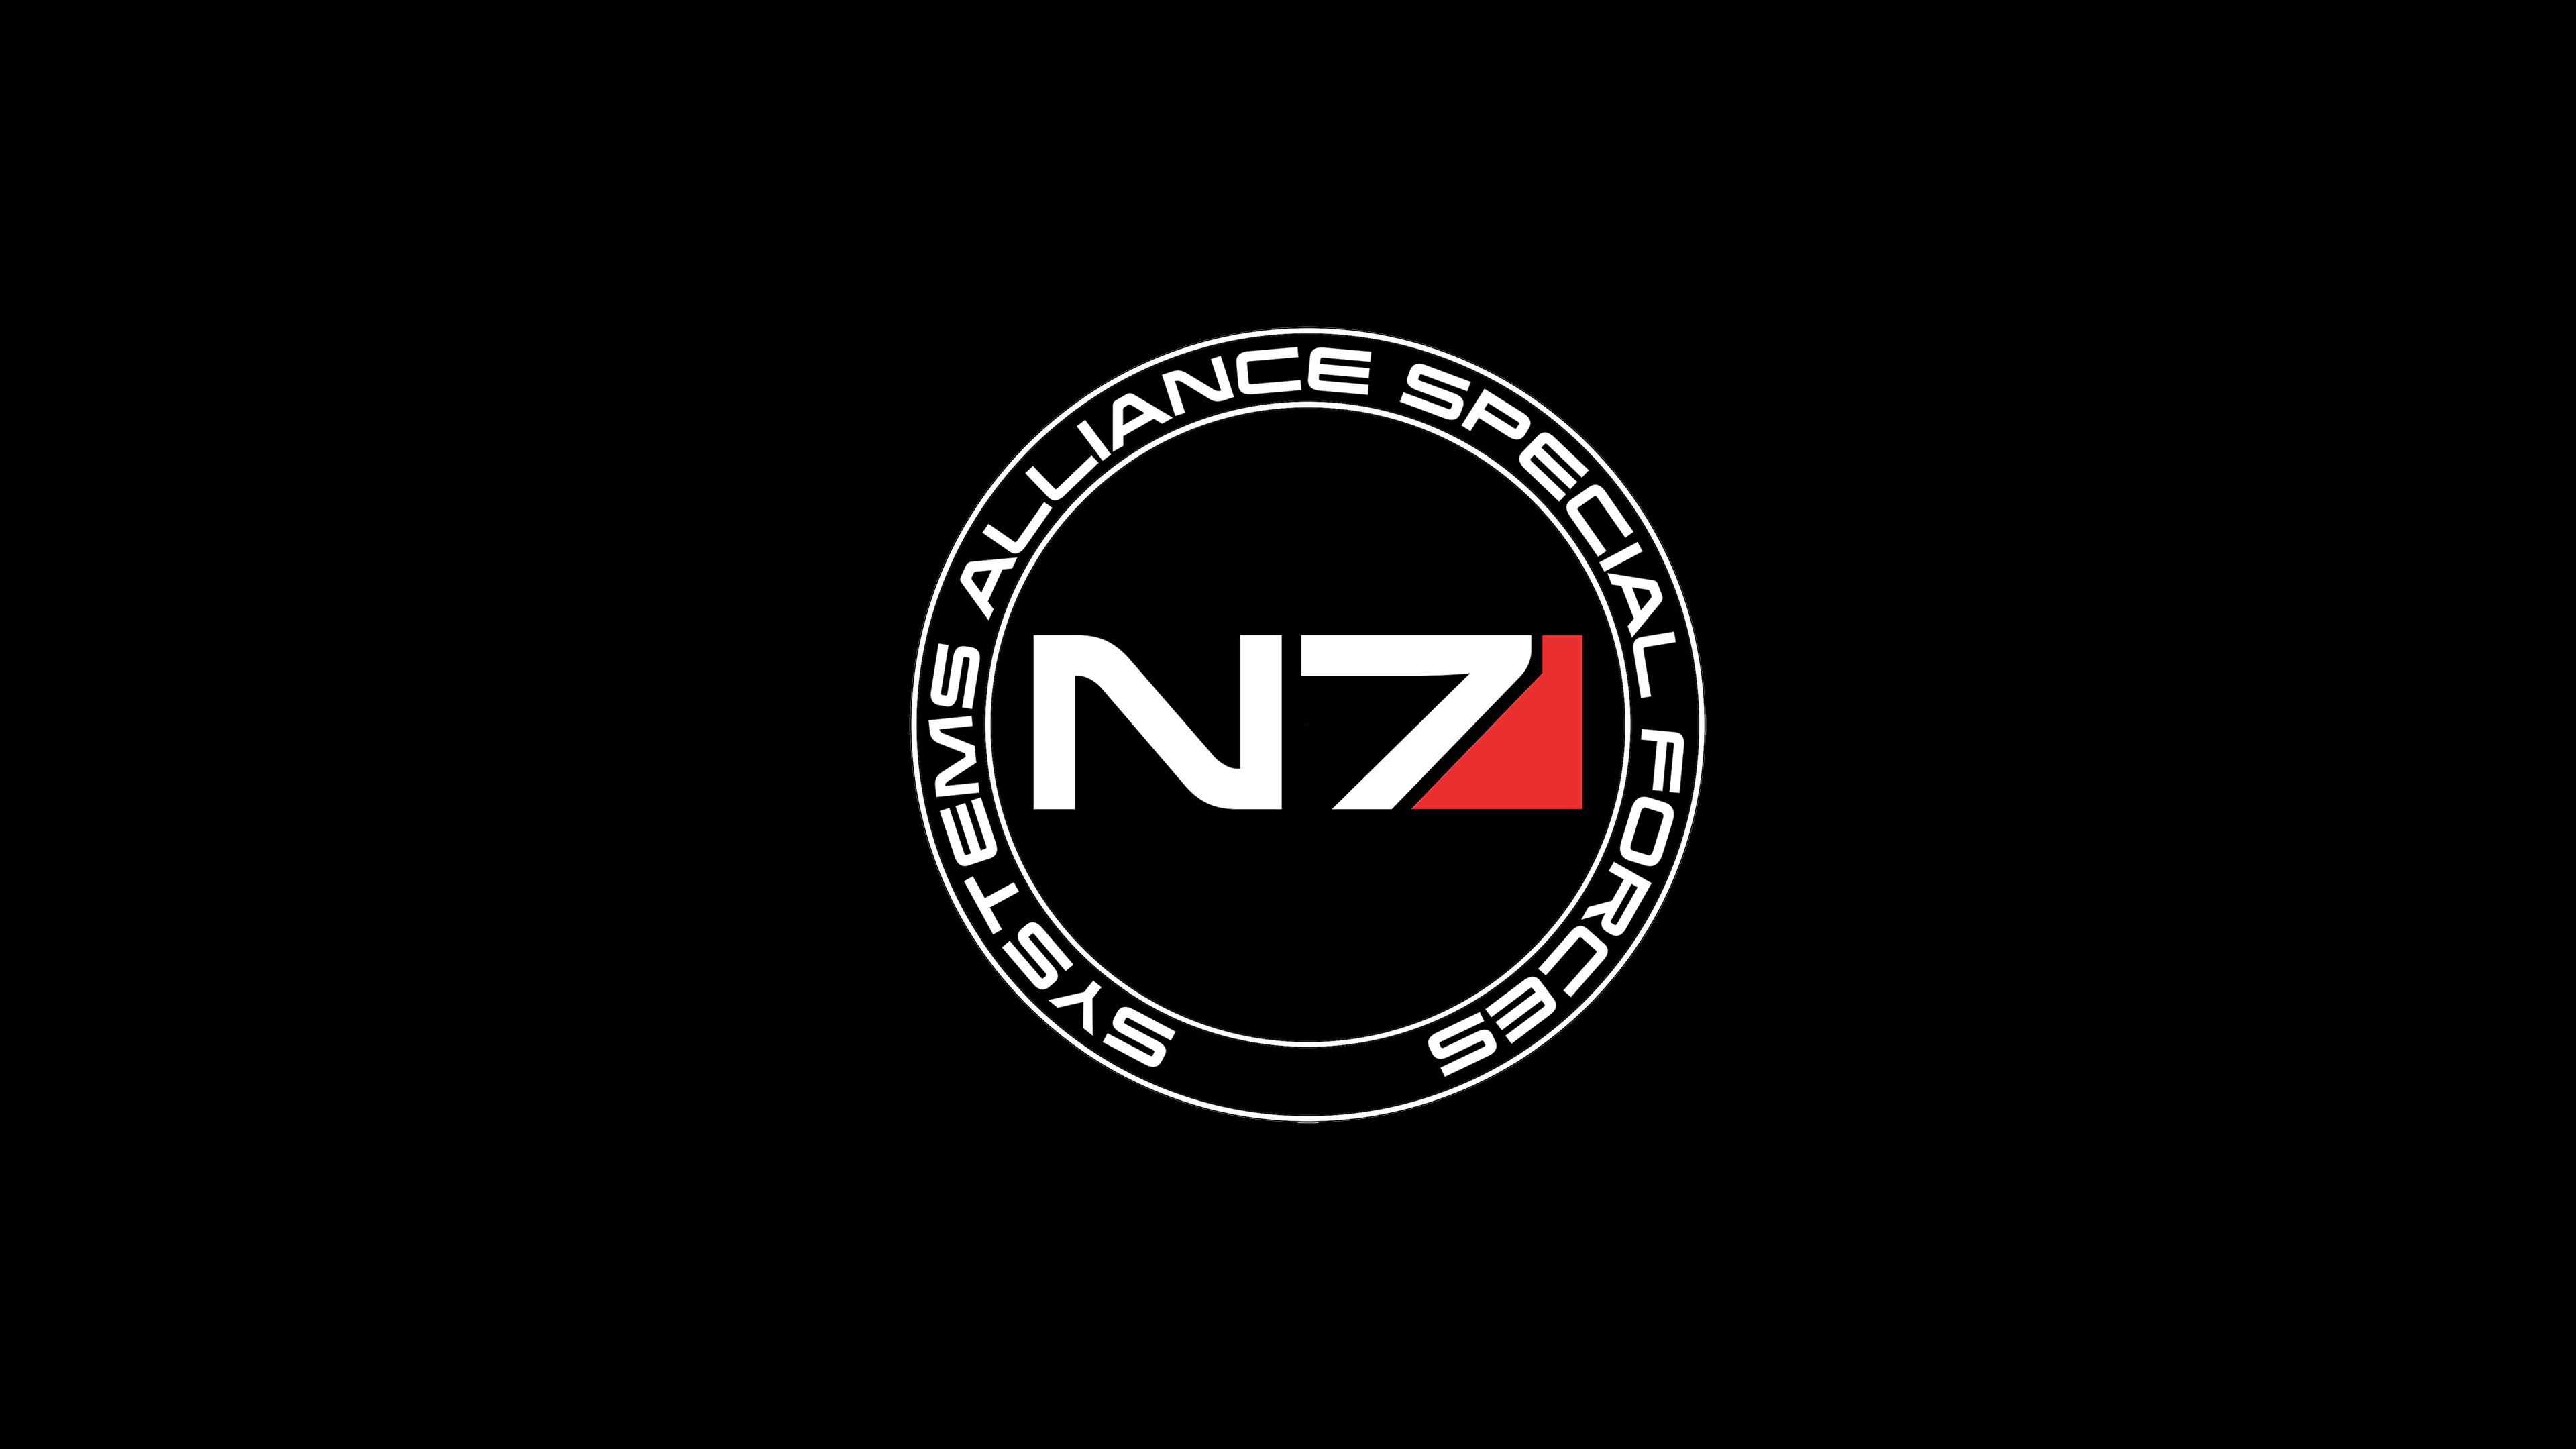 N7 Systems Alliance Special Forces by N7-ZHH on DeviantArt